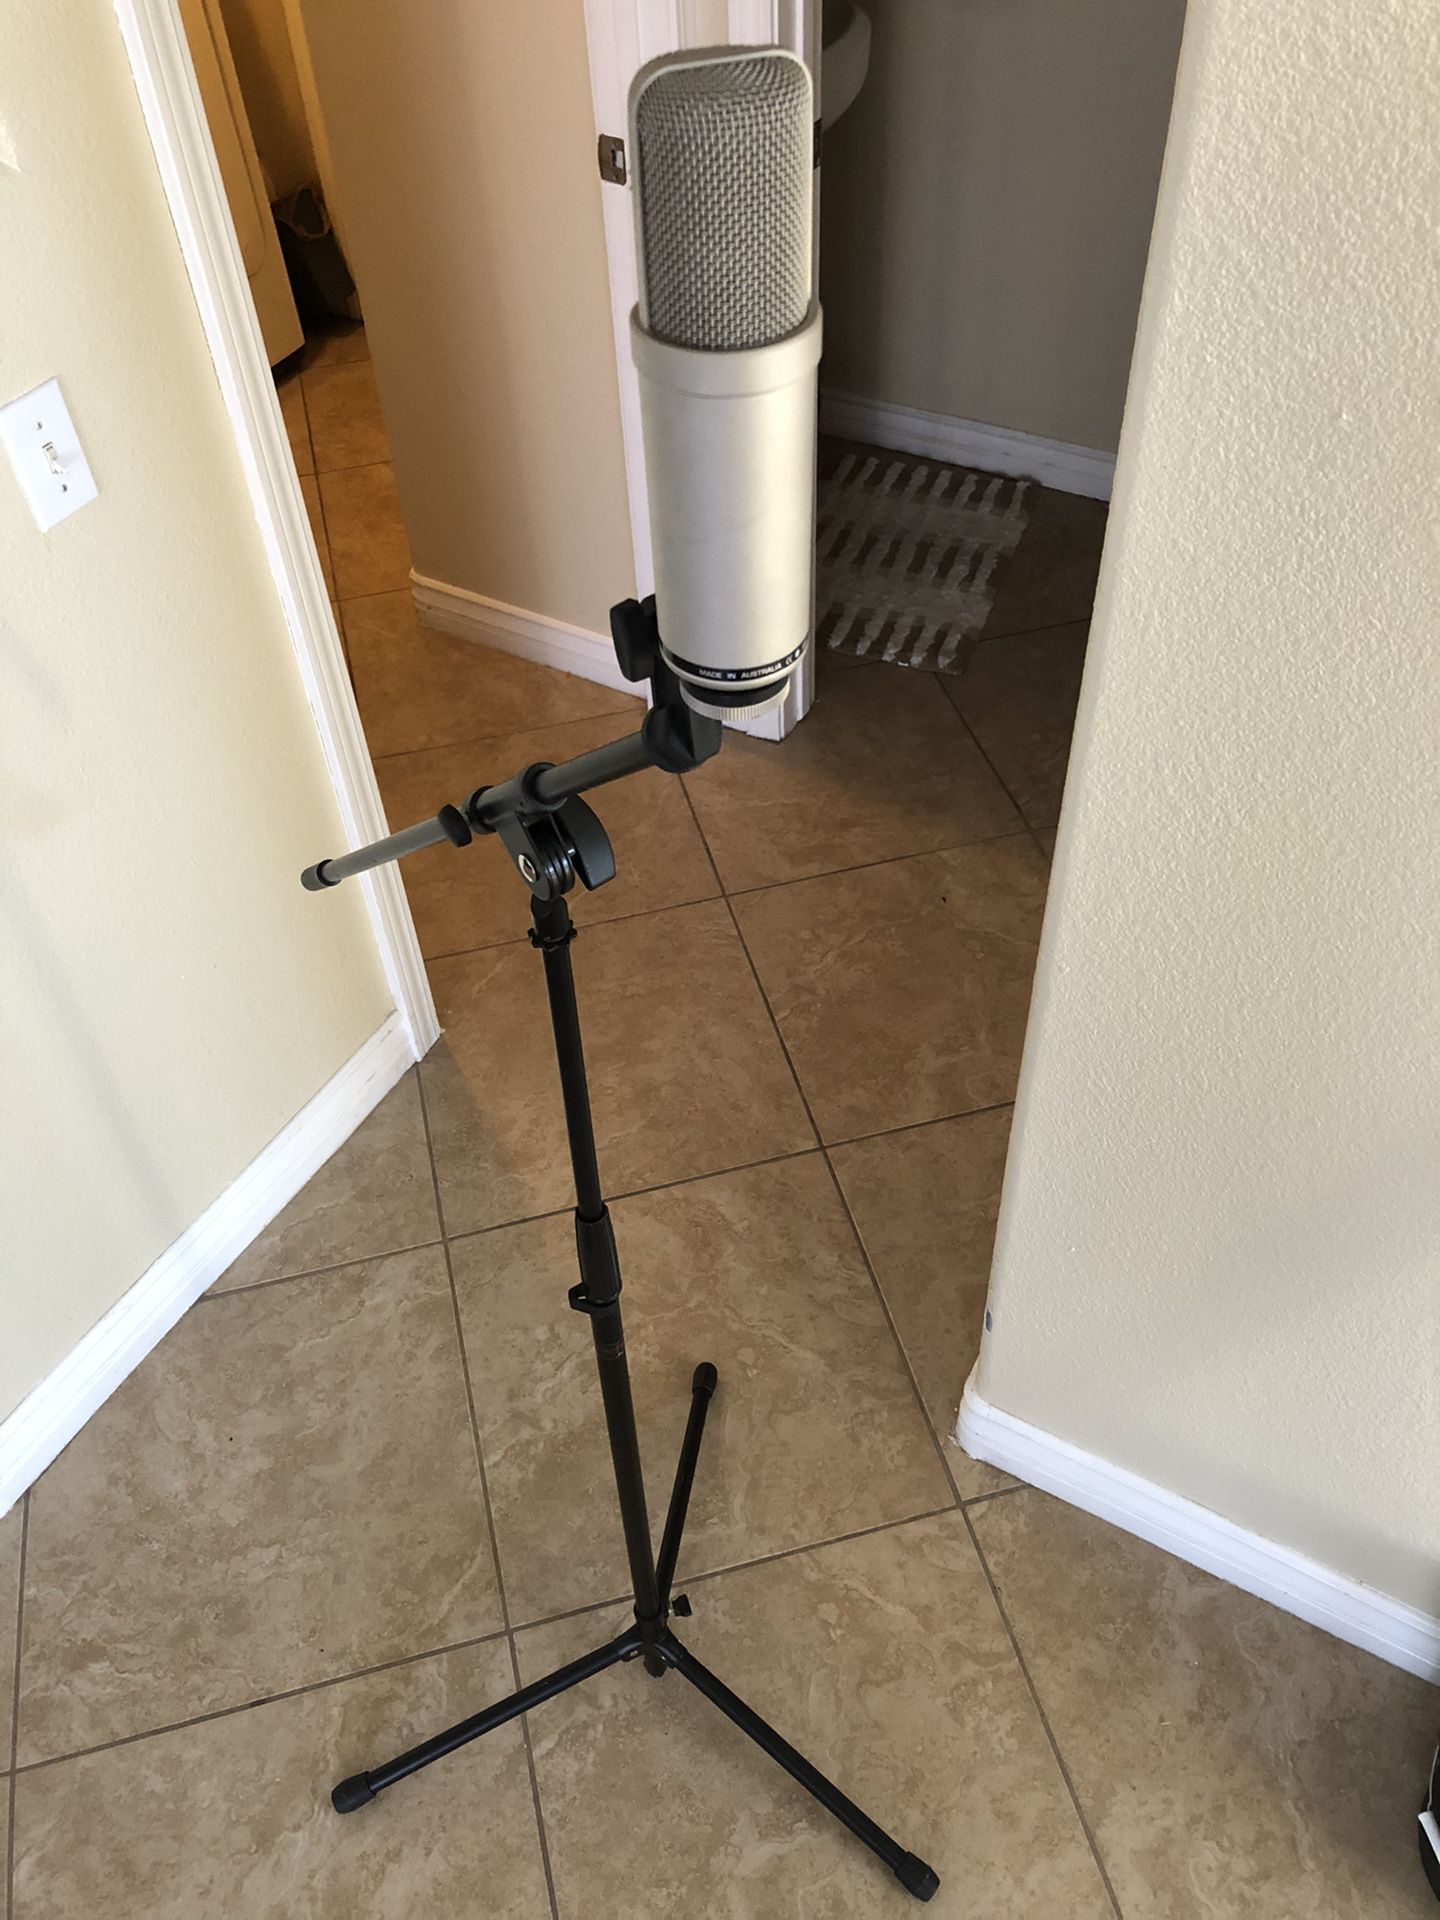 RODE NTK STUDIO CONDENSER MICROPHONE (comes with Stand/Chords/Interface)